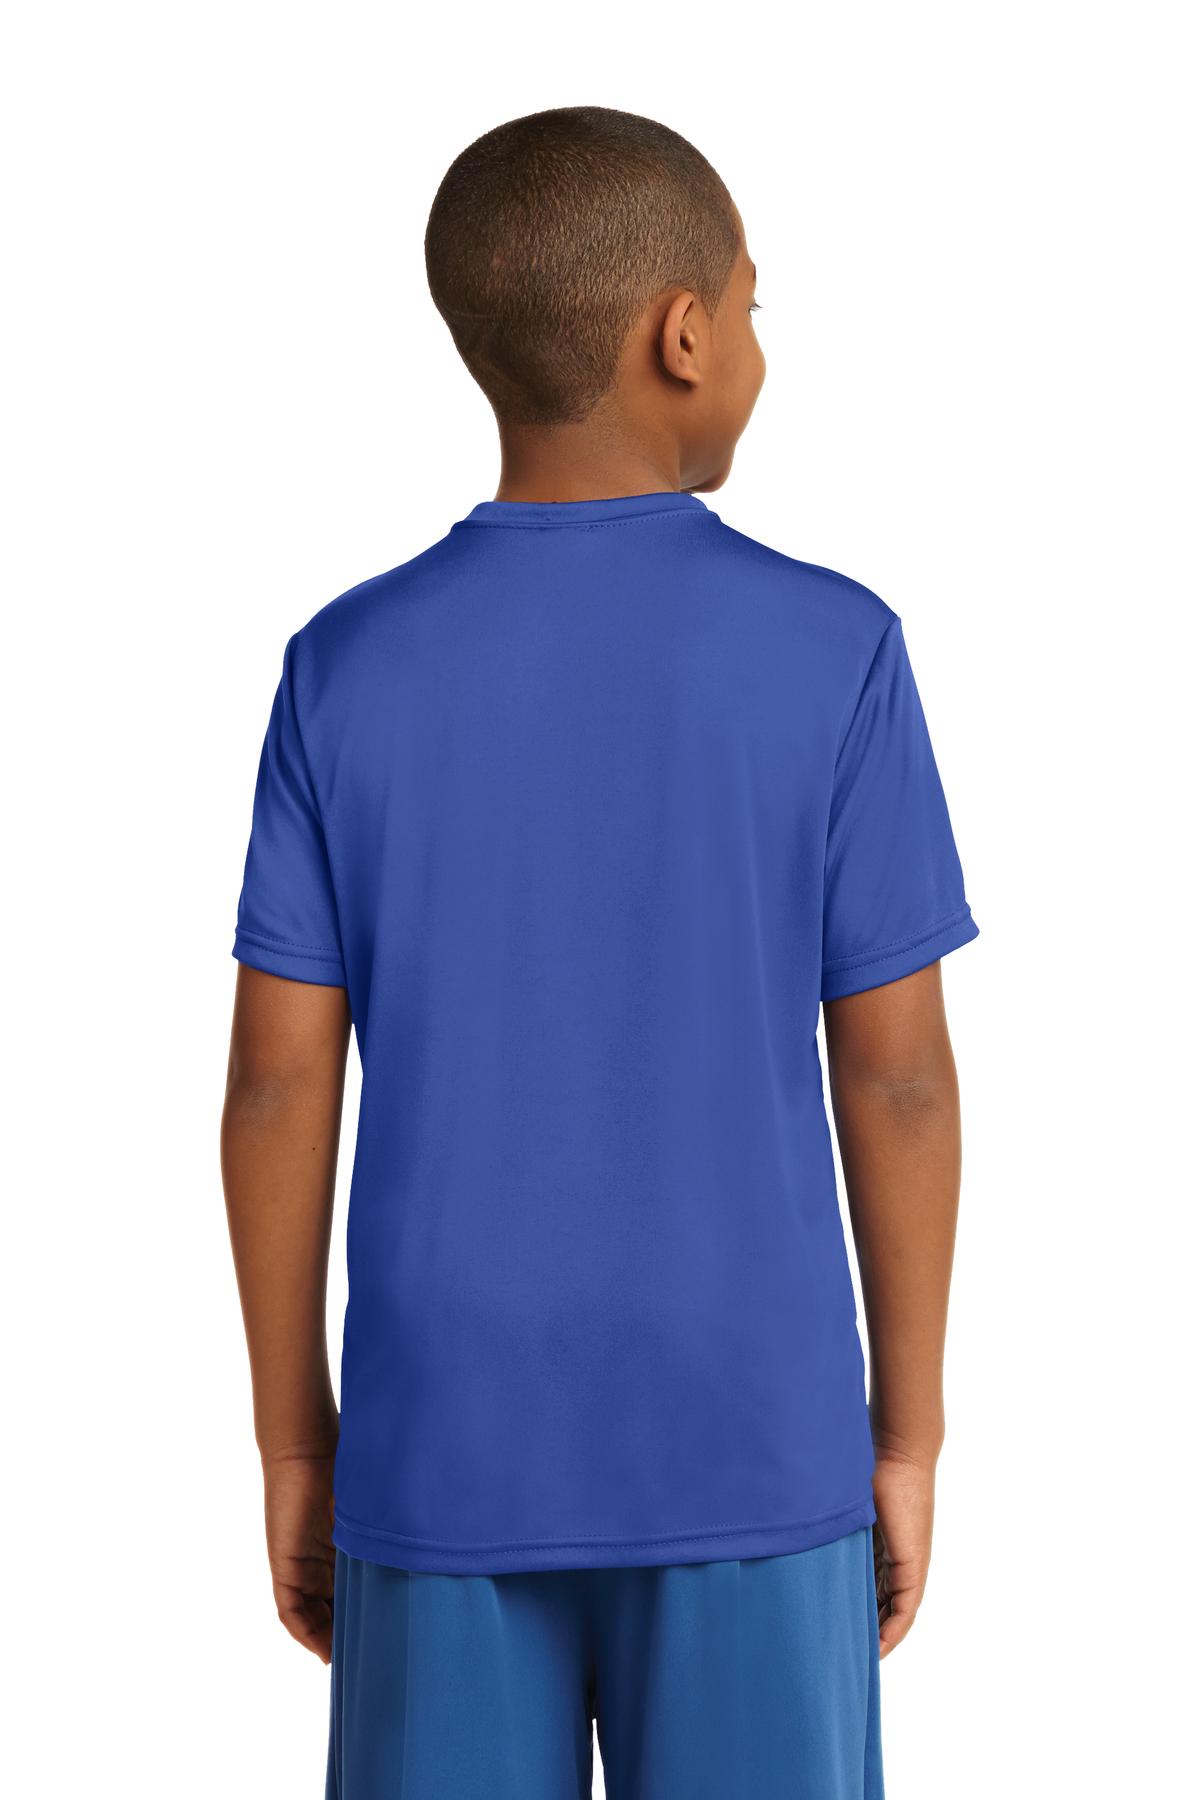 Sport-Tek® Youth PosiCharge® Competitor™ Tee. YST350 [True Royal] - DFW Impression